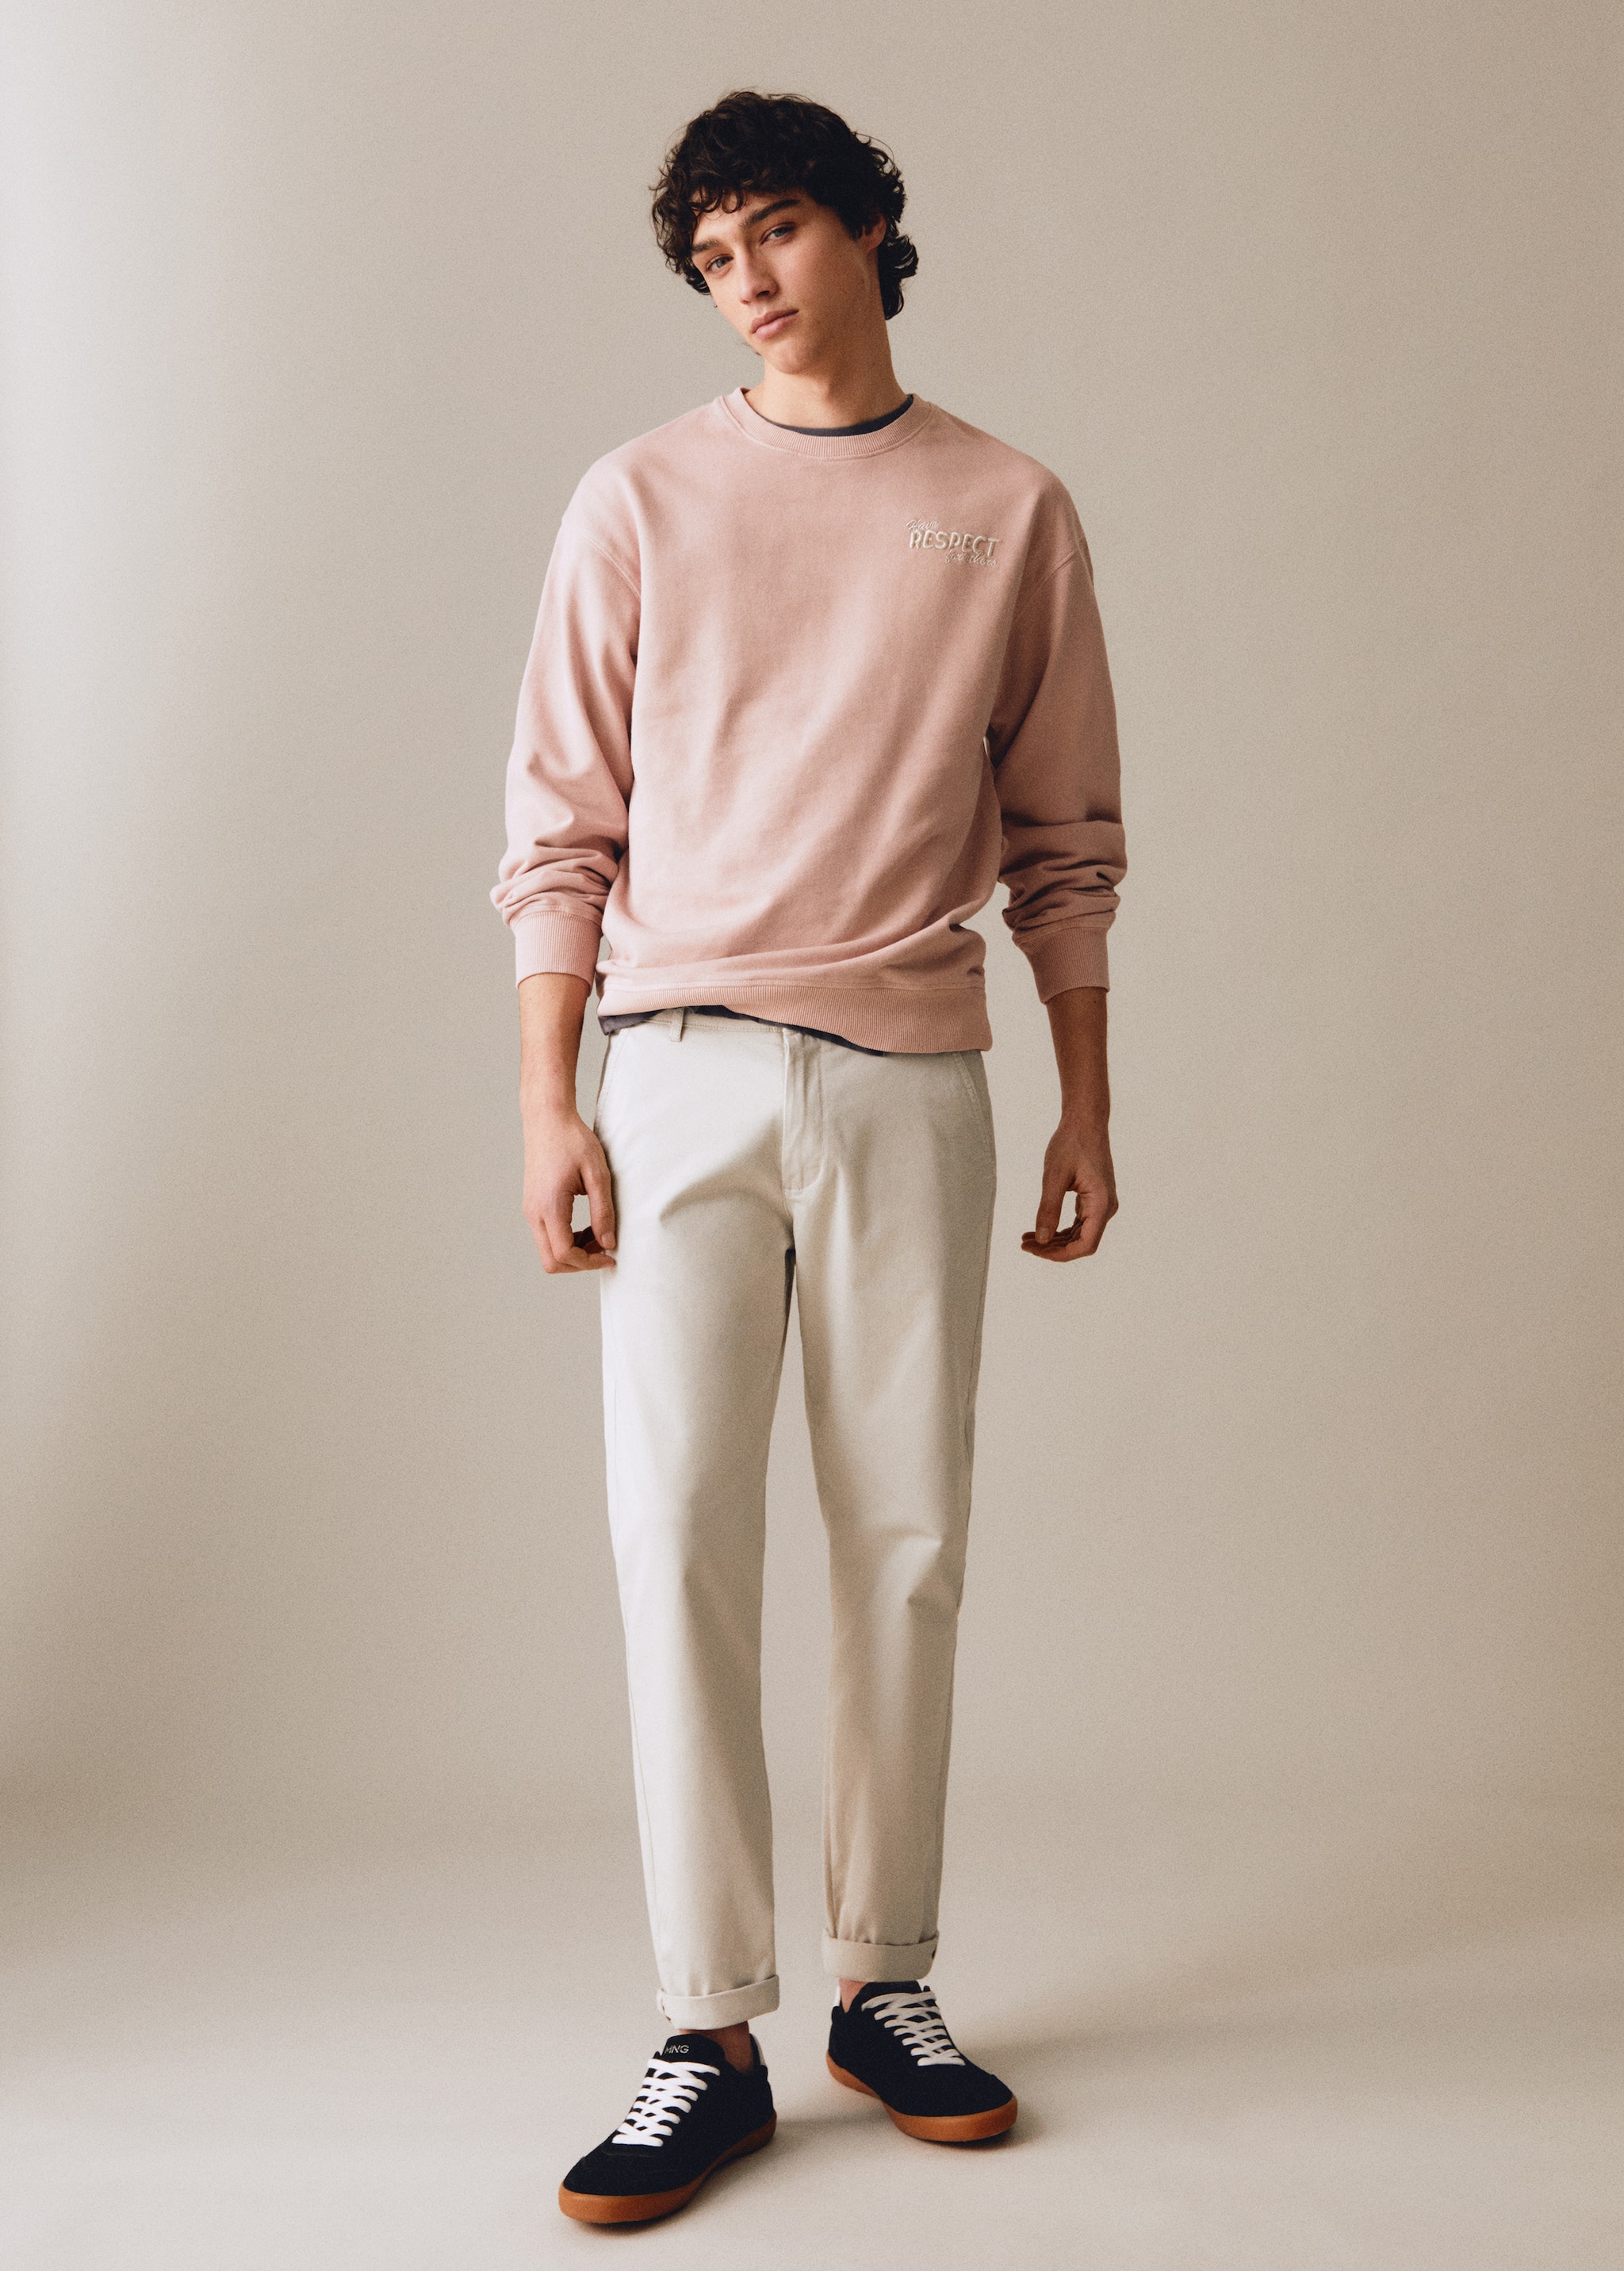 Cotton chinos - Details of the article 5